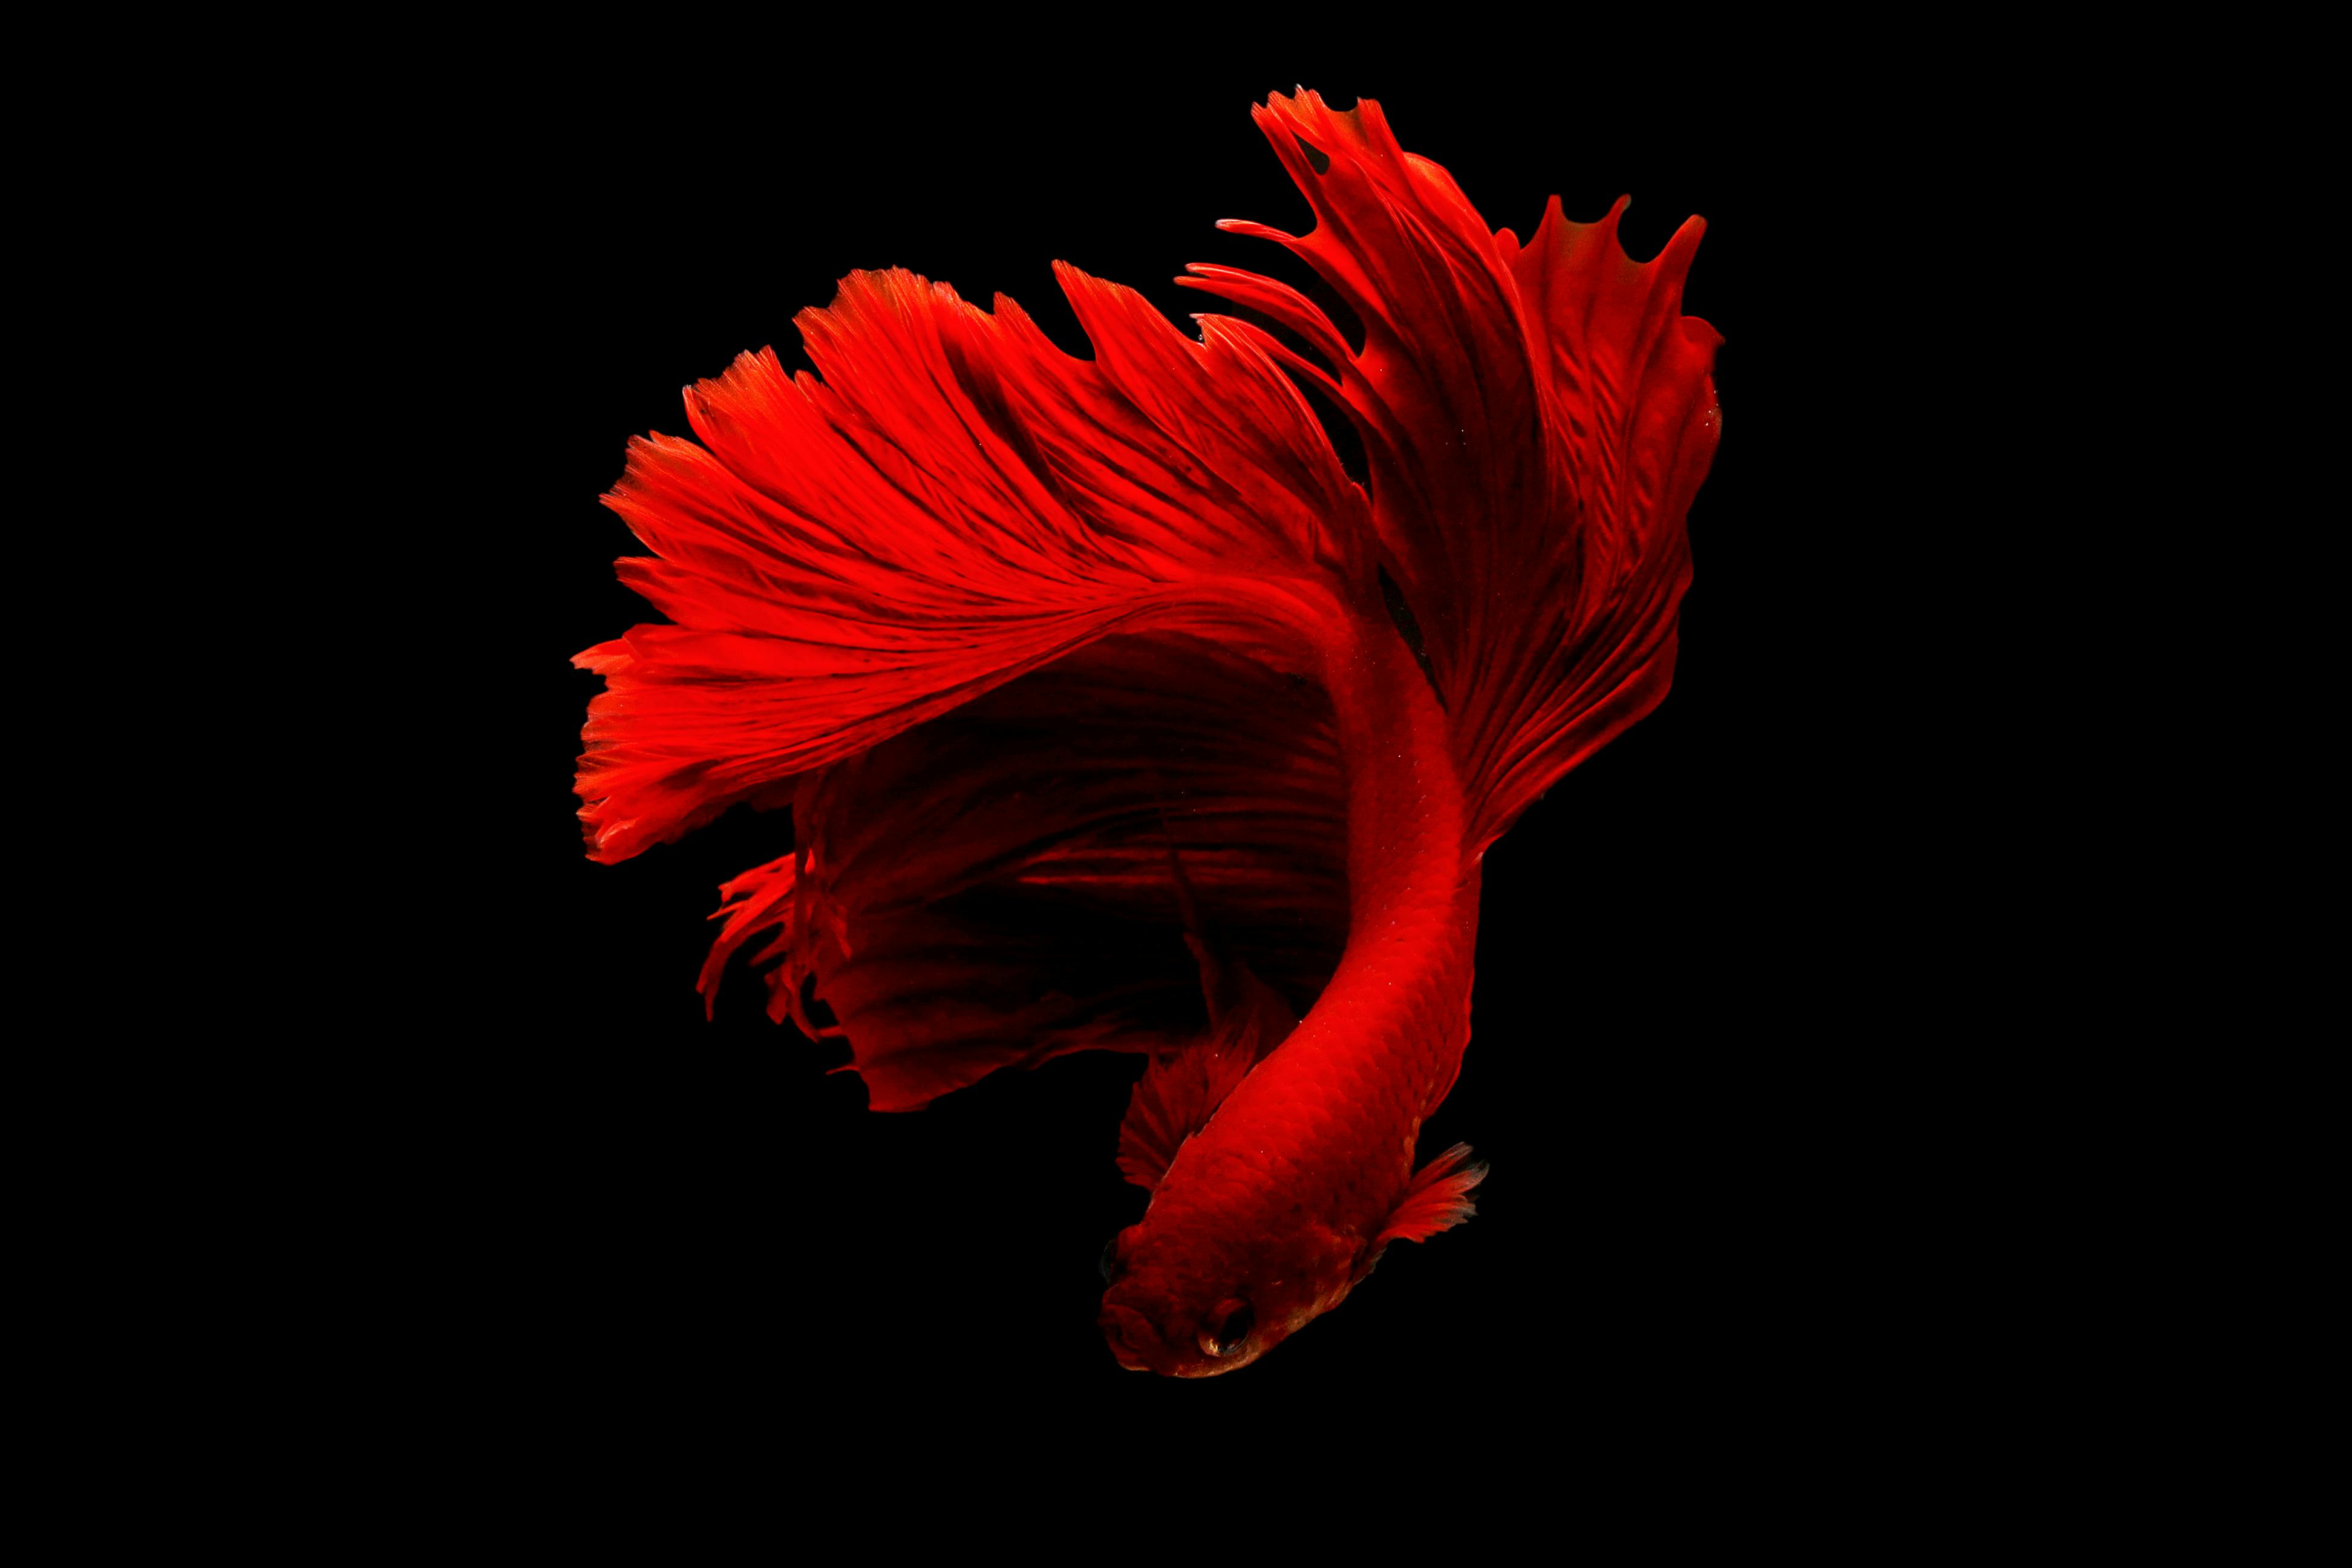 Mobile wallpaper Animal Fish Siamese Fighting Fish Betta 1255752  download the picture for free